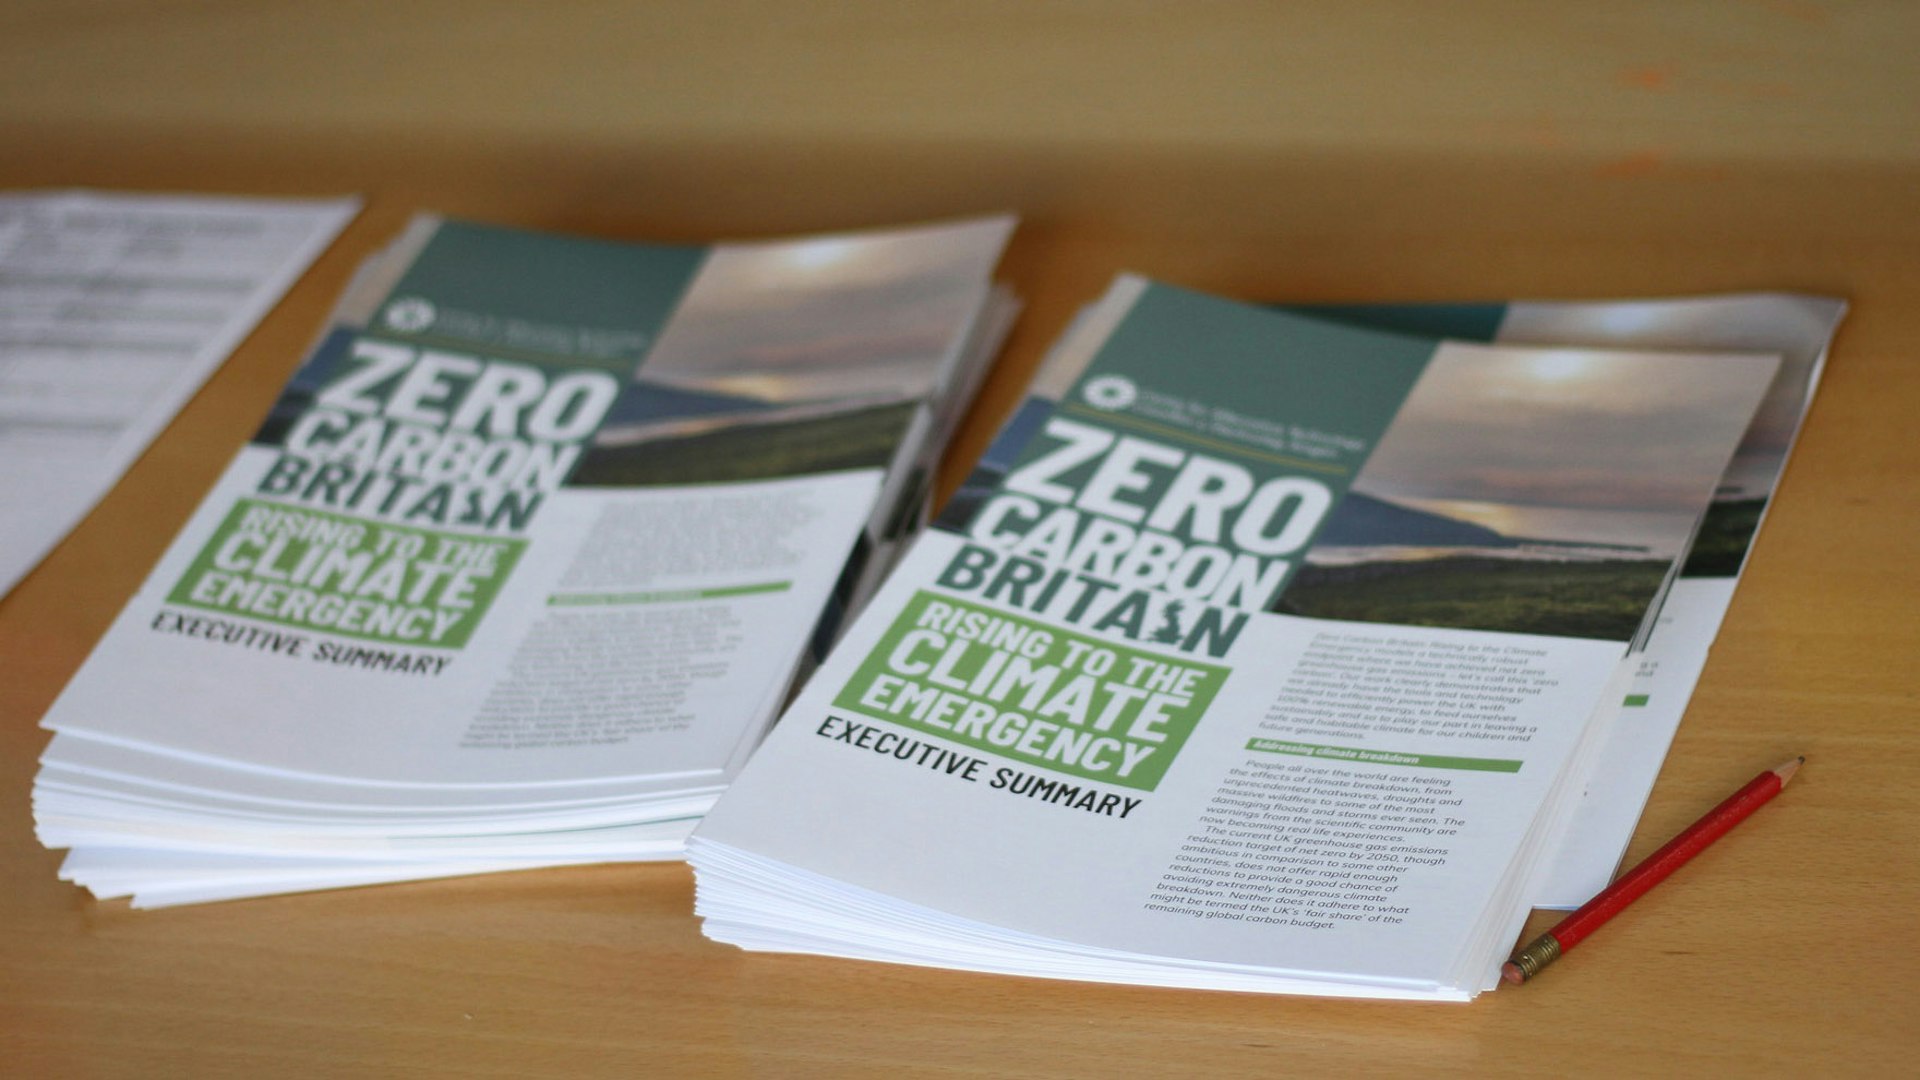 Image showing the Zero Carbon Britain: Rising to the Climate Emergency report on a table